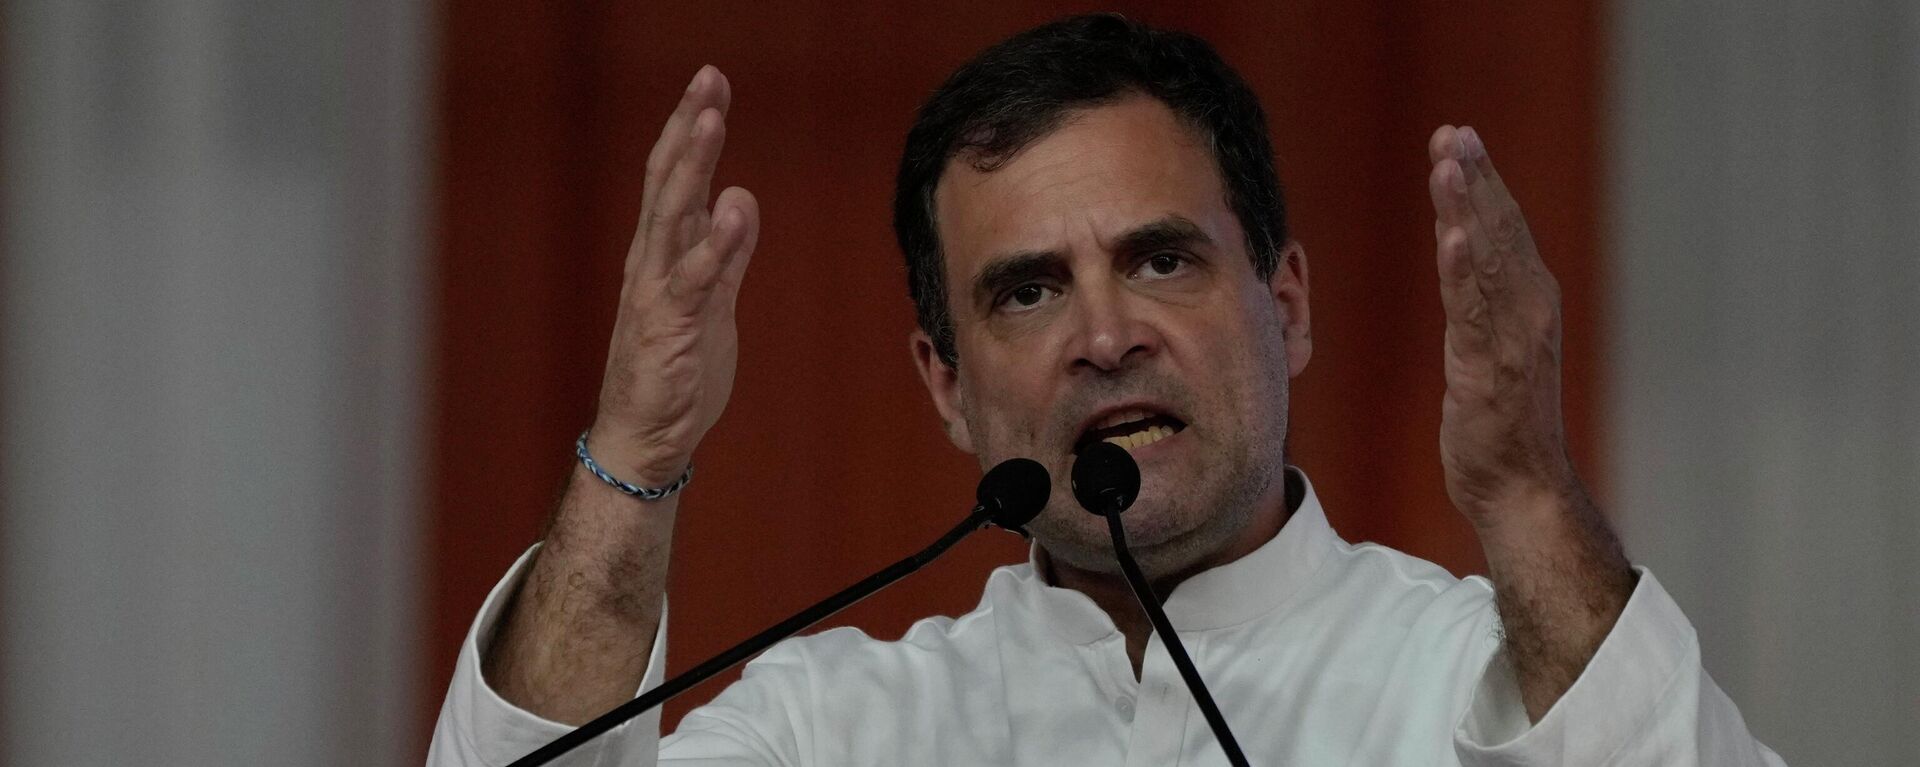 India's opposition Congress party leader Rahul Gandhi speaks during a meeting of his party workers in Ahmedabad, India, Monday, Sept. 5, 2022 - Sputnik International, 1920, 18.11.2022